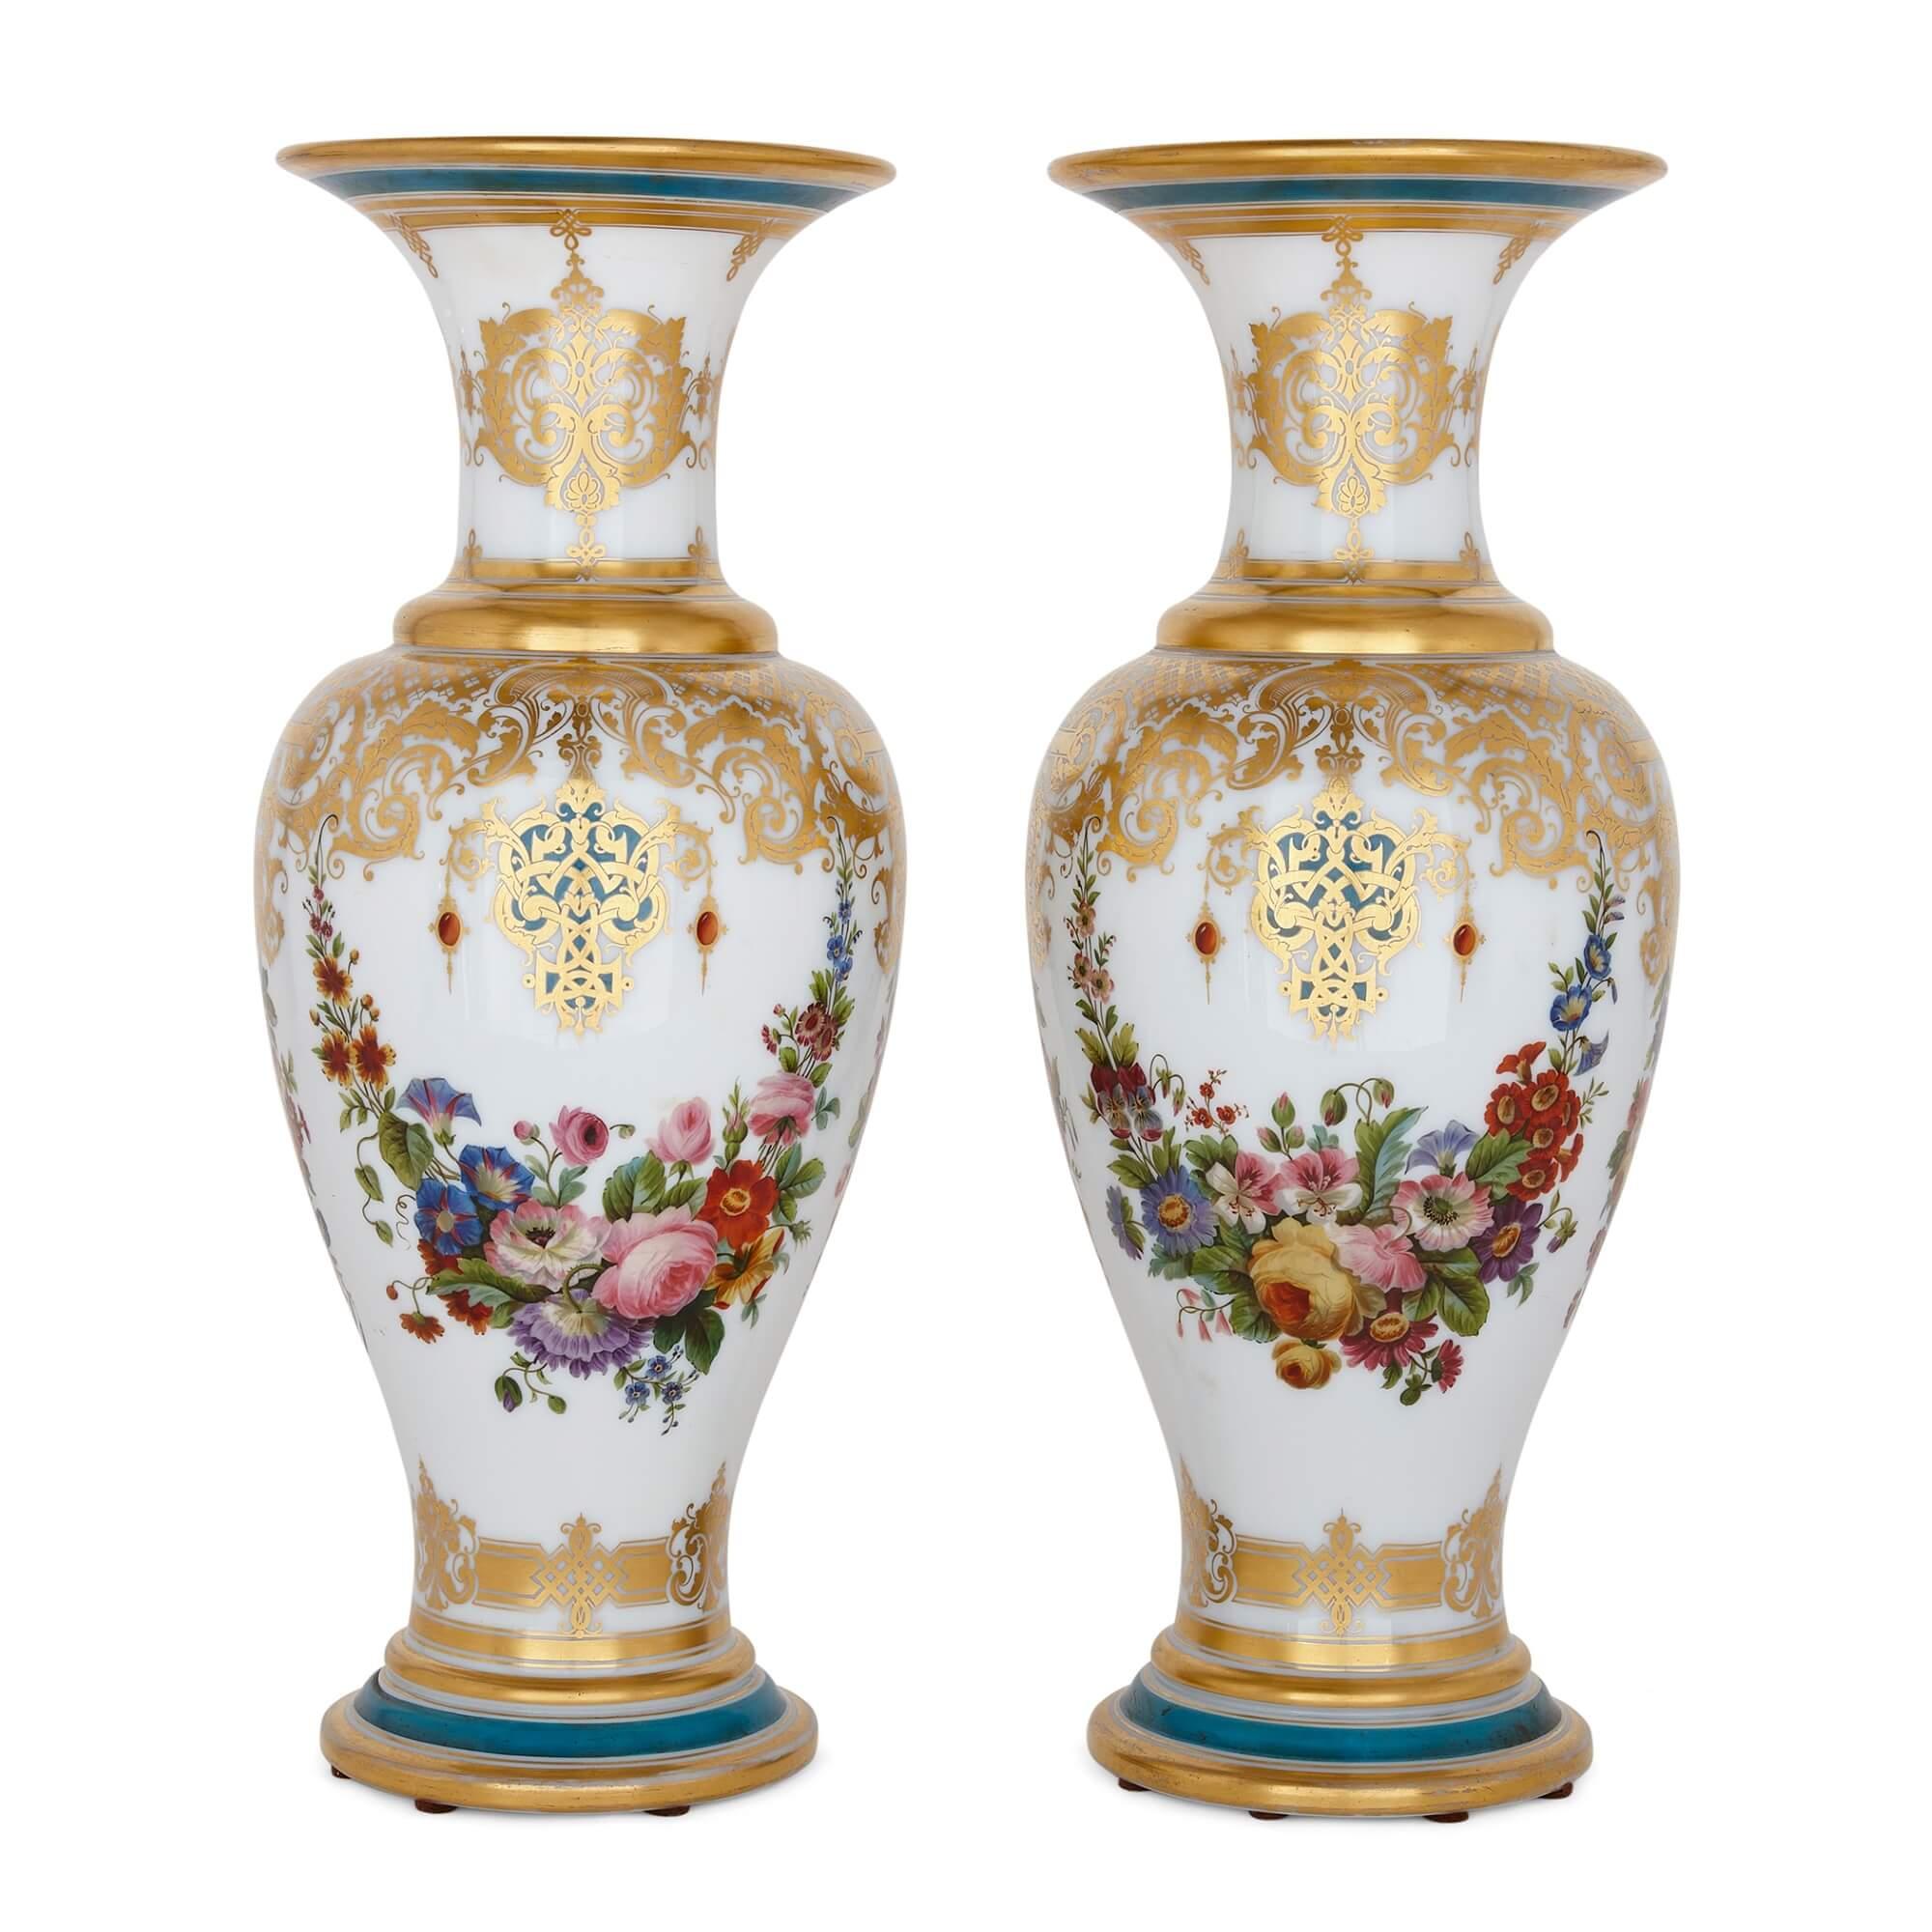 Pair of painted and parcel gilt opaline glass vases by Baccarat
French, c. 1850
Height 51cm, diameter 21cm

Crafted by the renowned firm of Baccarat in France around 1850, this pair of vases features an array of Rococo-style ornamentation. 

The